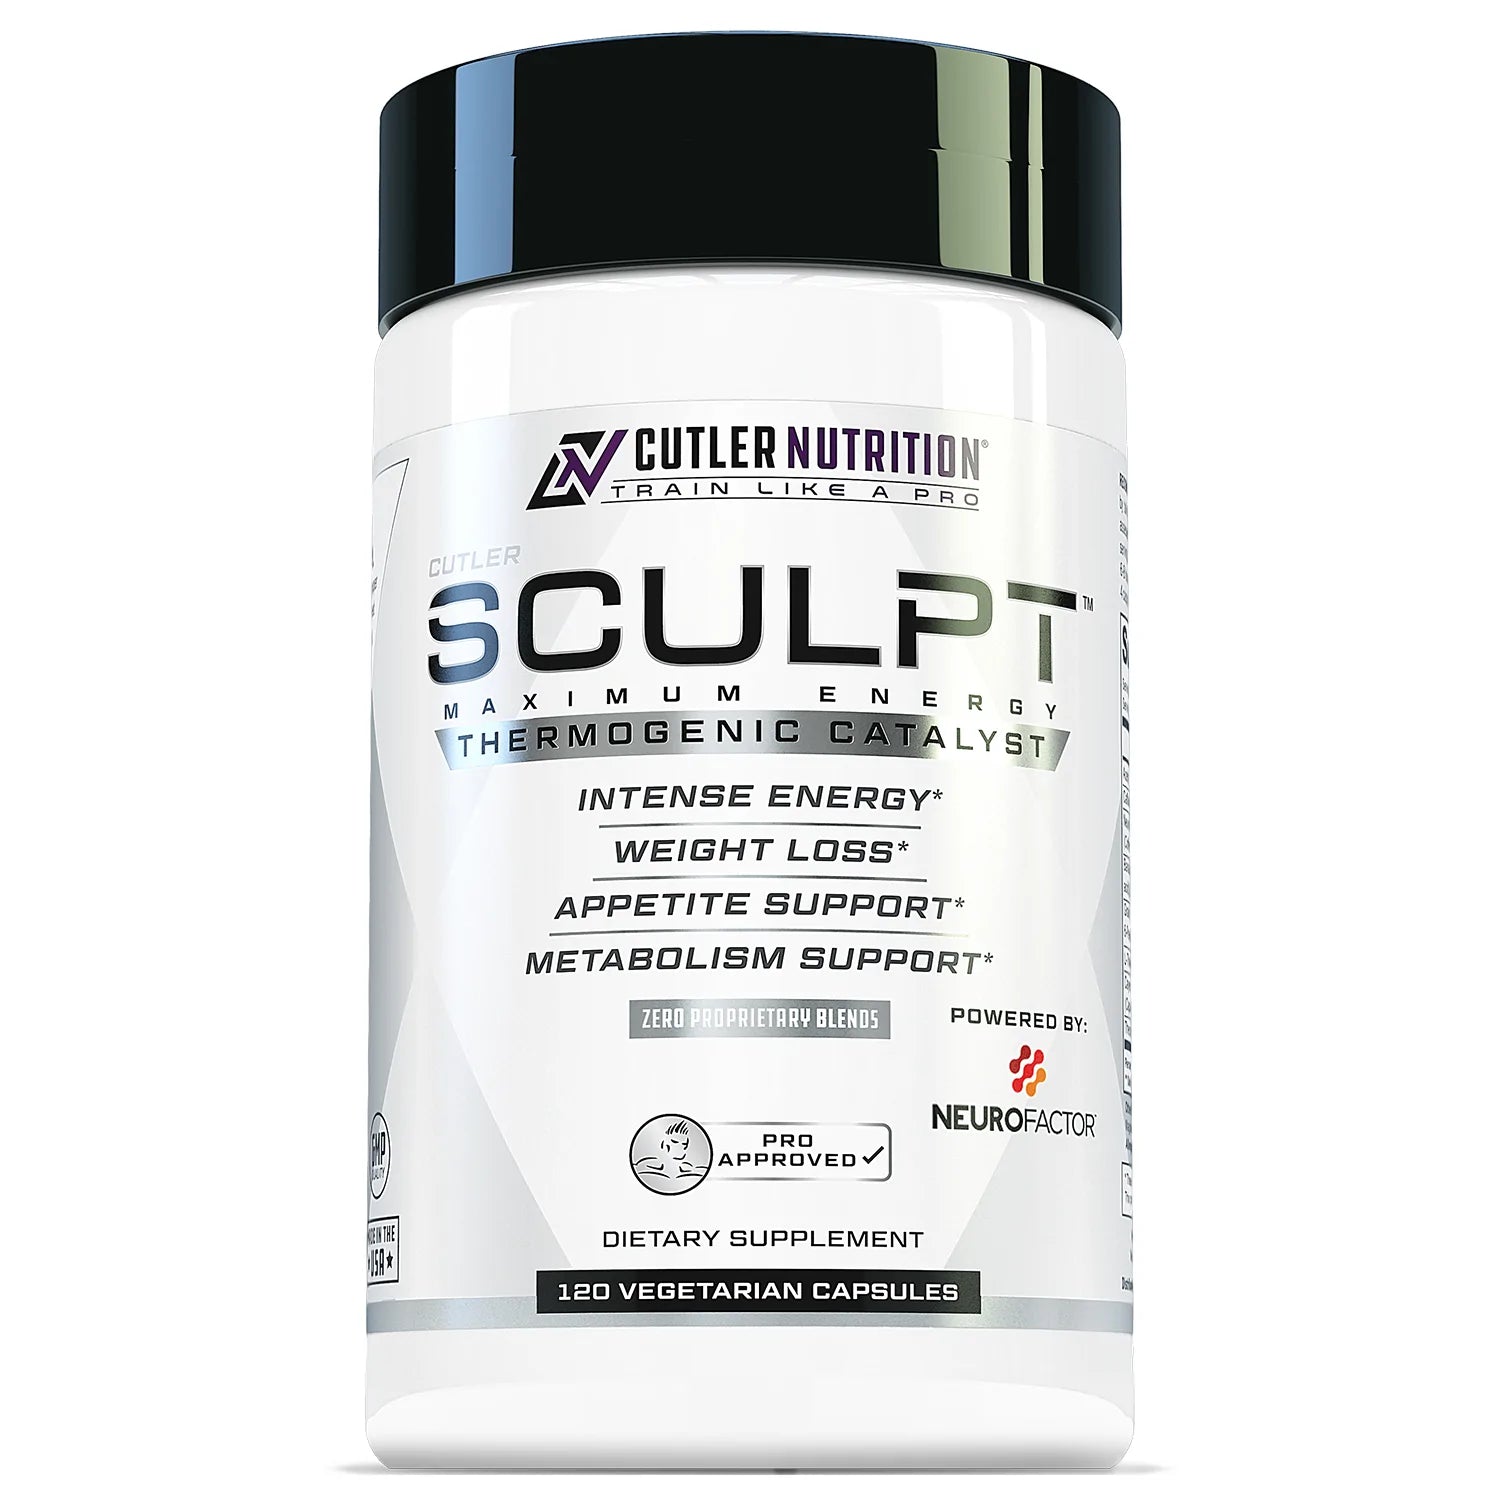 bottle of Cutler Sculpt Thermogenic